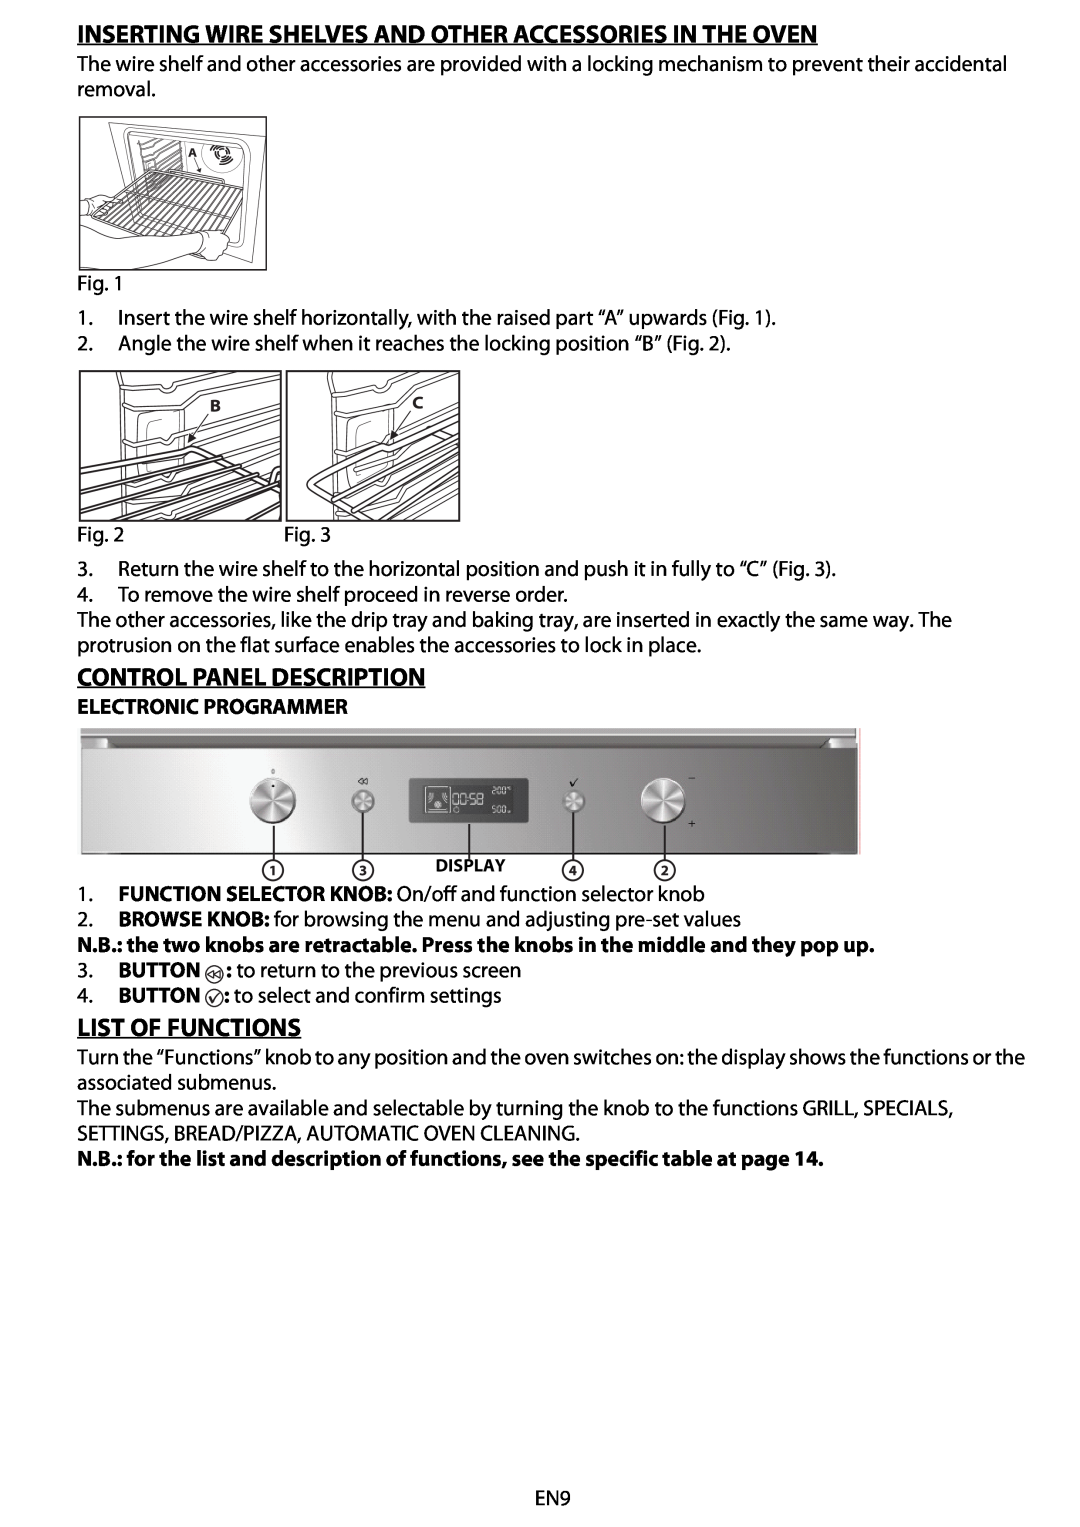 Whirlpool AKZM 778 Inserting Wire Shelves And Other Accessories In The Oven, Control Panel Description, List Of Functions 